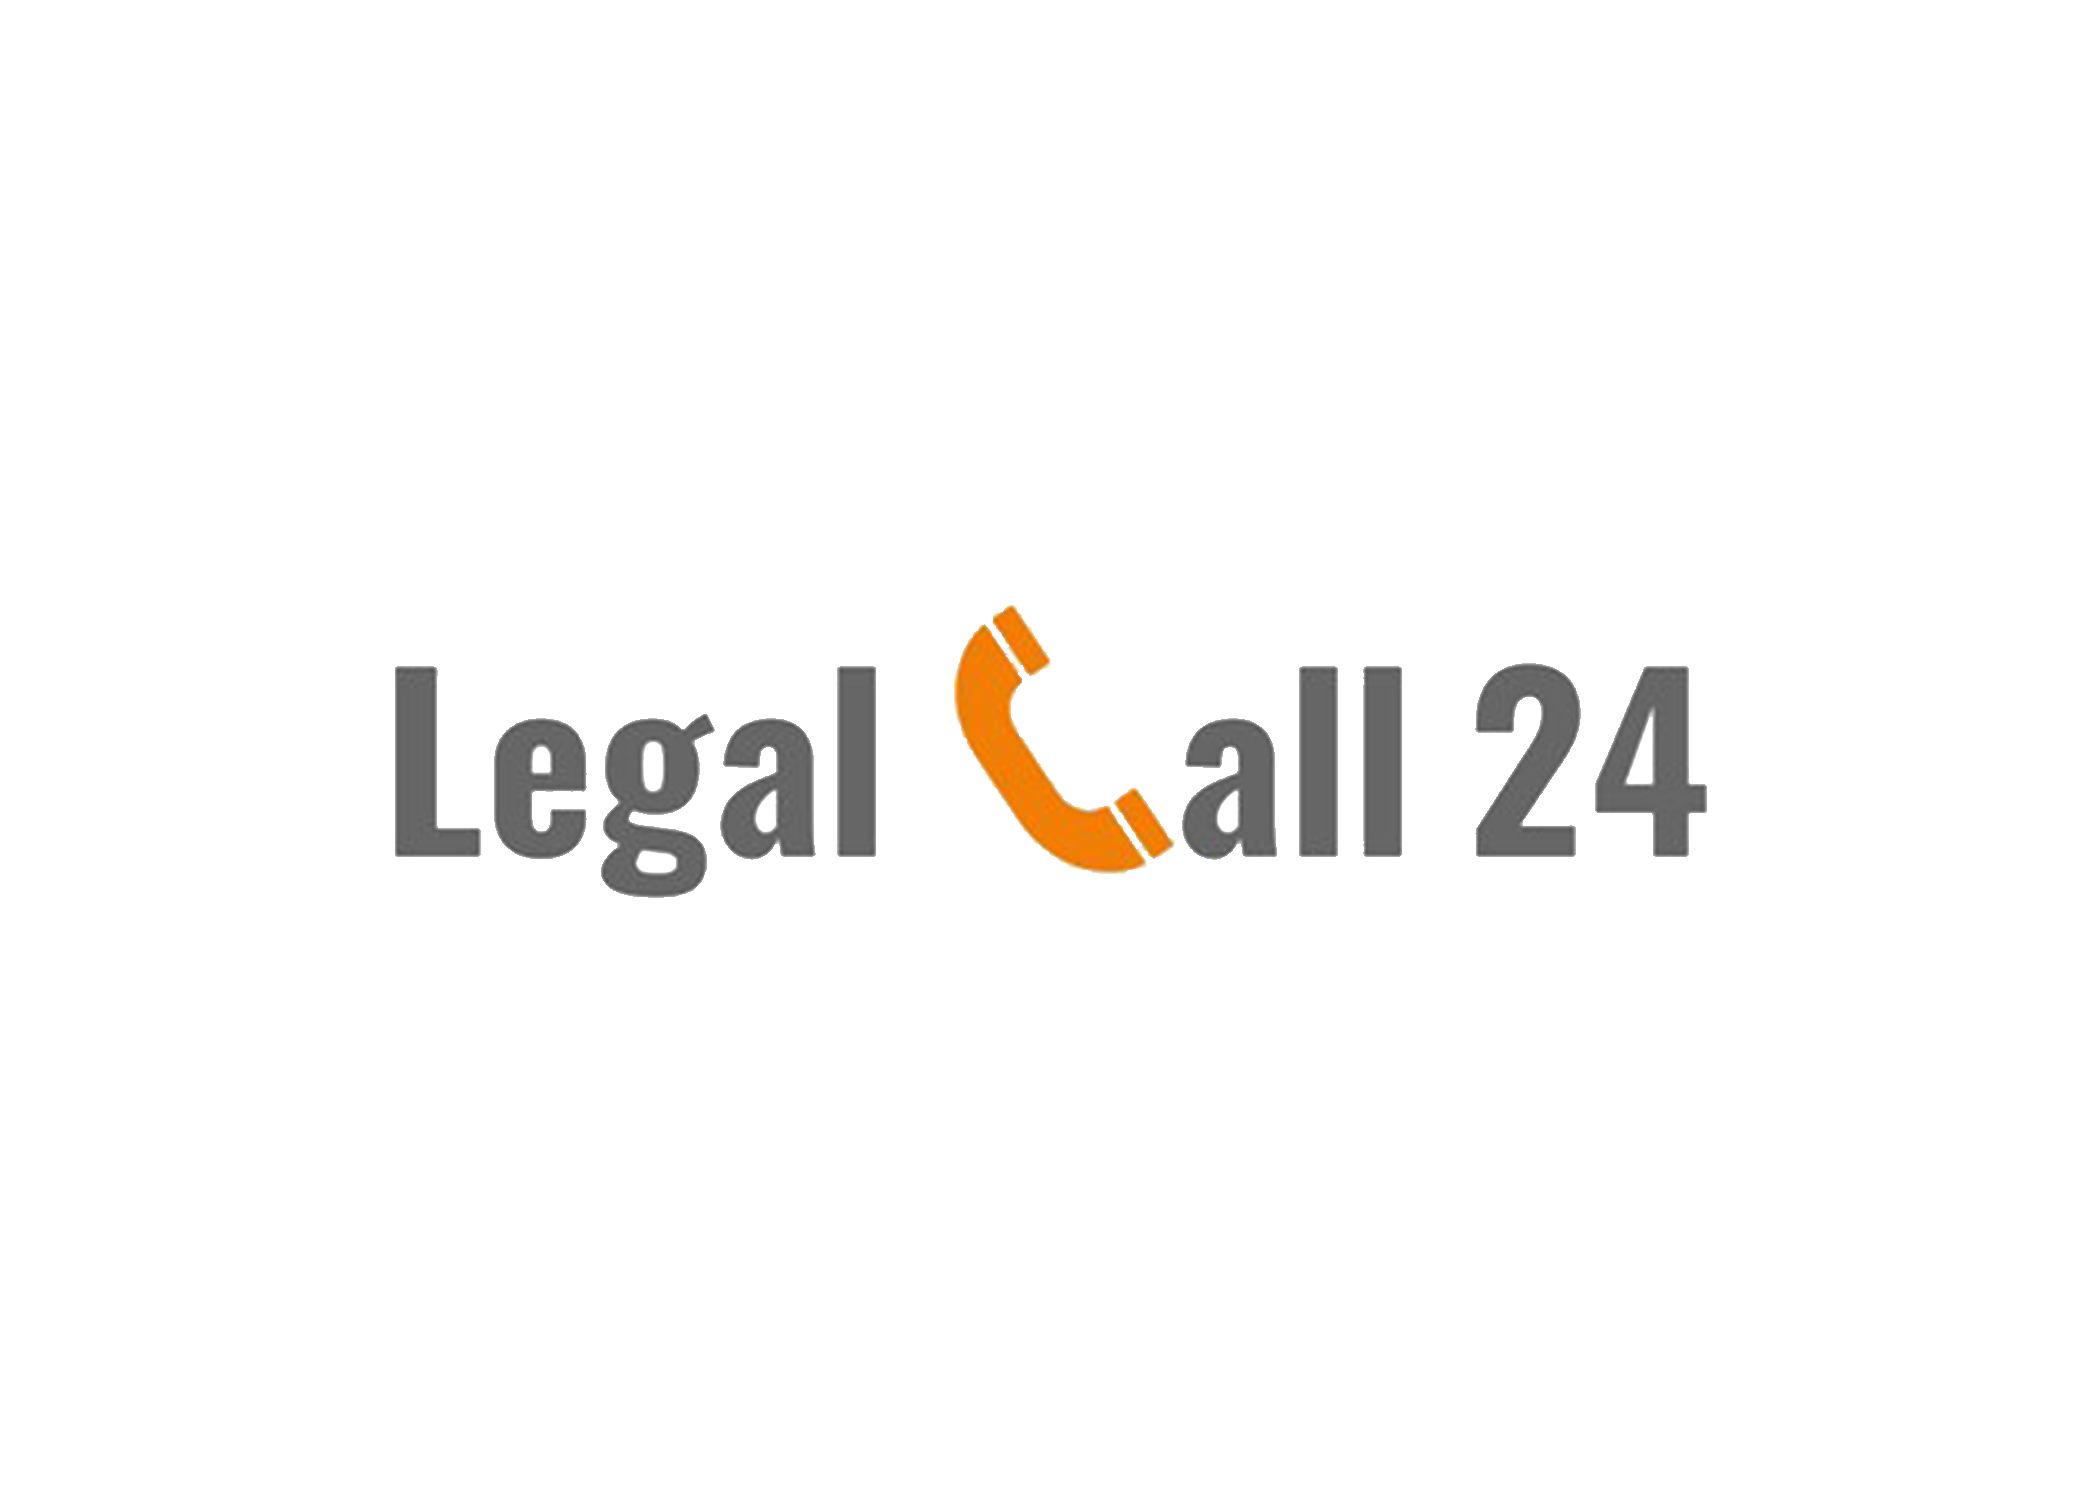 Legal Call Telephone Answering Service USA | Legal Call 24